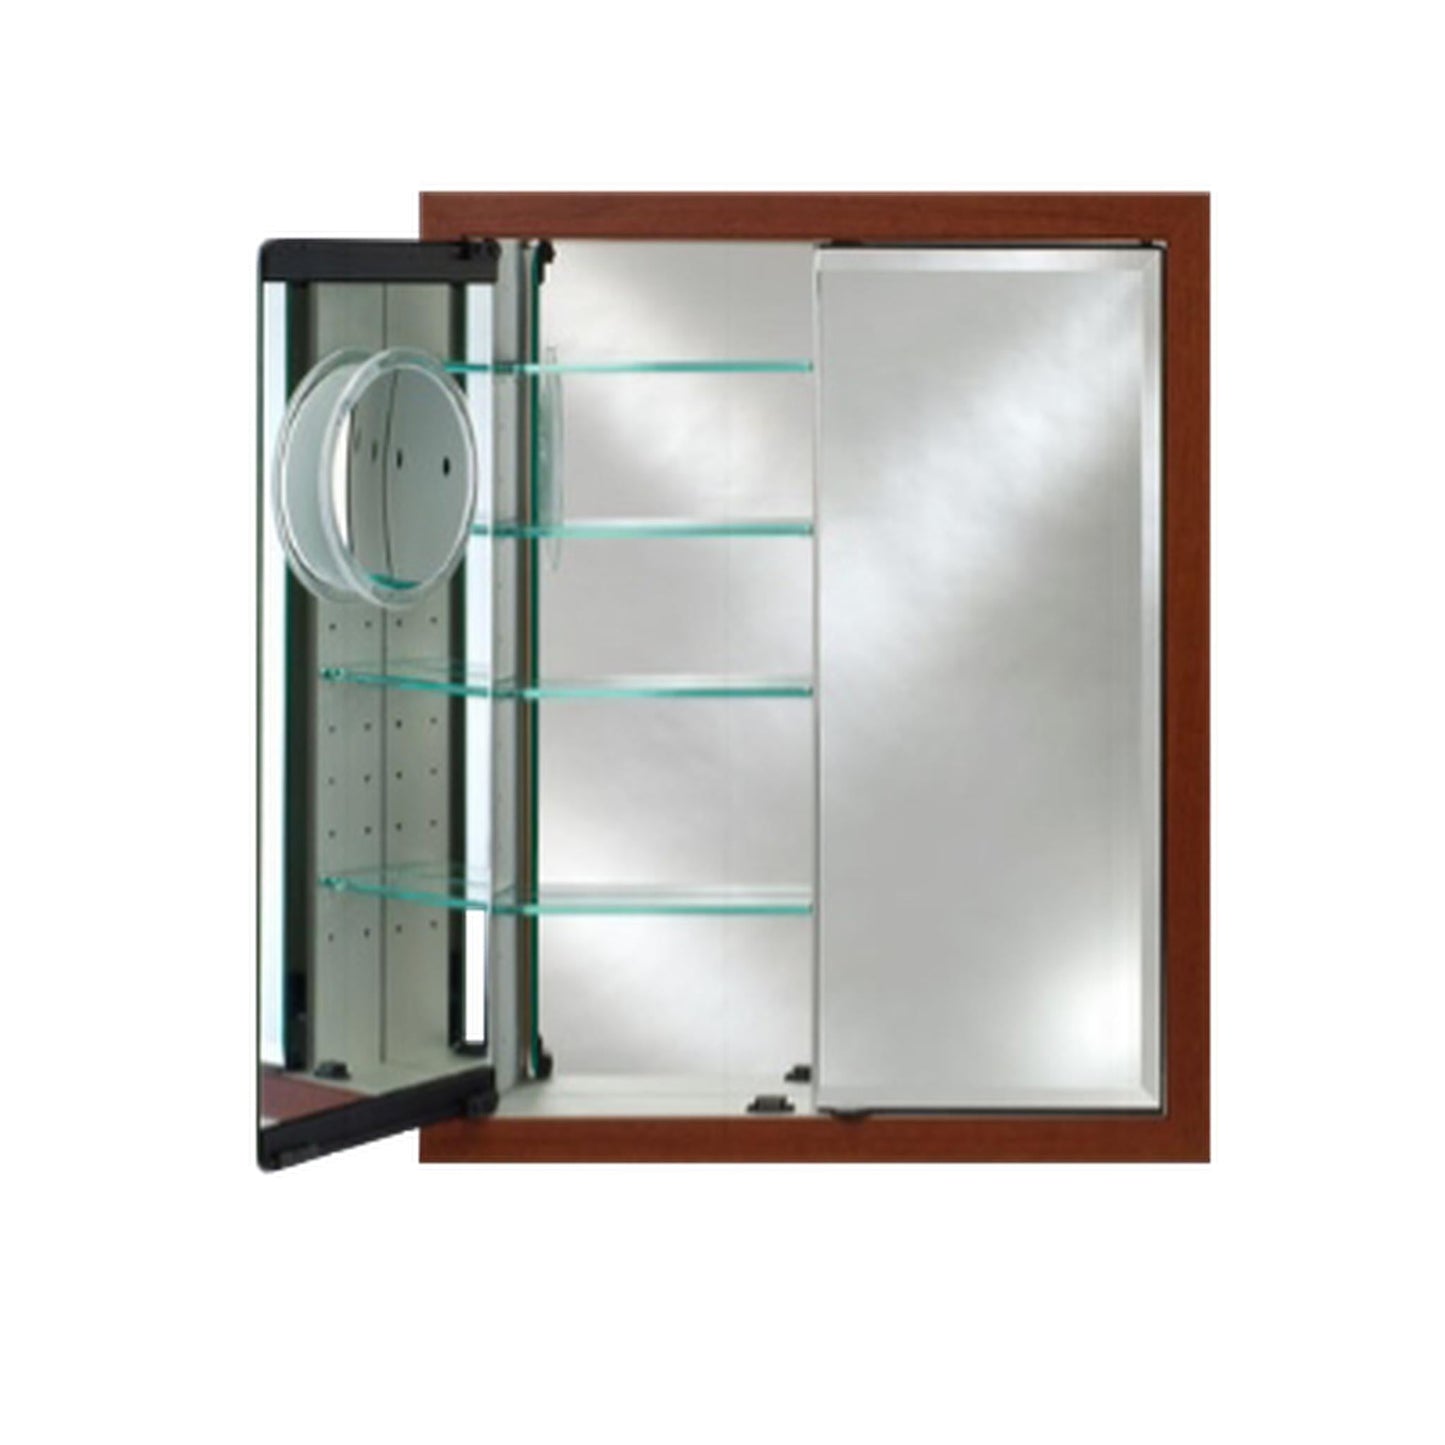 Afina Signature 33" x 23" Polished Glimmer-Scallop Recessed Retro-Fit Double Door Medicine Cabinet With Beveled Edge Mirror